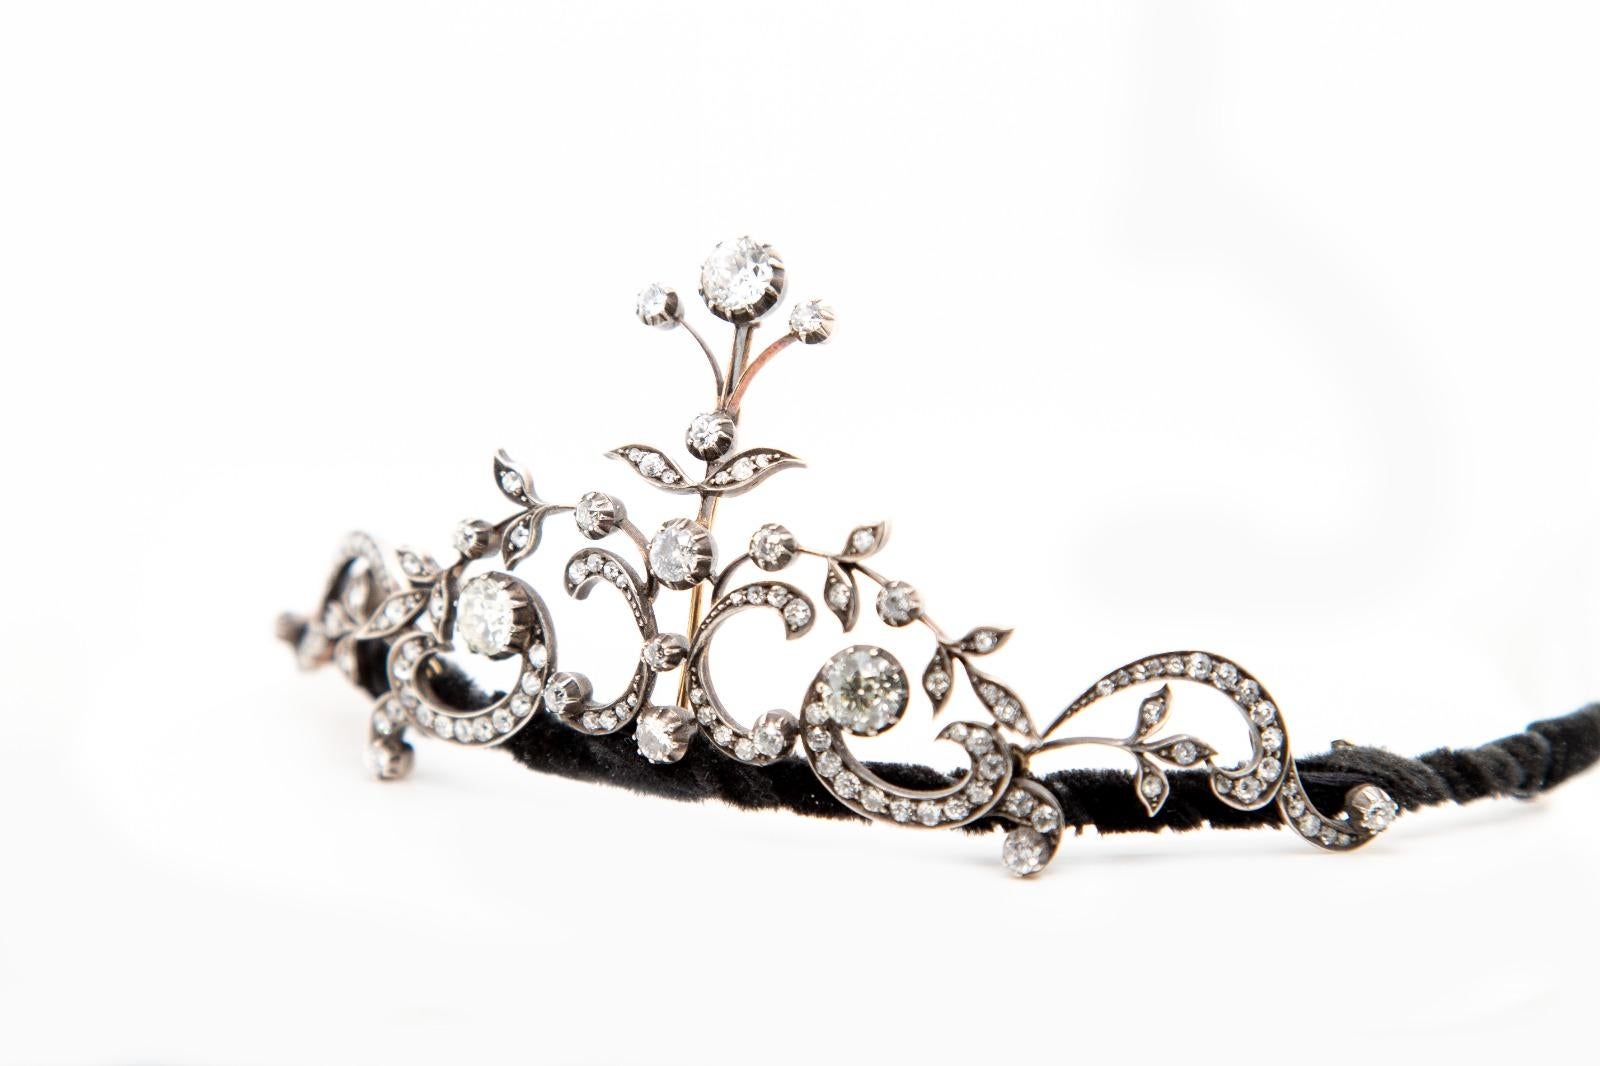 A Victorian old cut diamond tiara.

This exquisite, handmade Victorian yellow gold and silver diamond tiara is comprised of a central foliate design, vertically set with round old cut diamonds and a cascade of old cut diamond set openwork floral